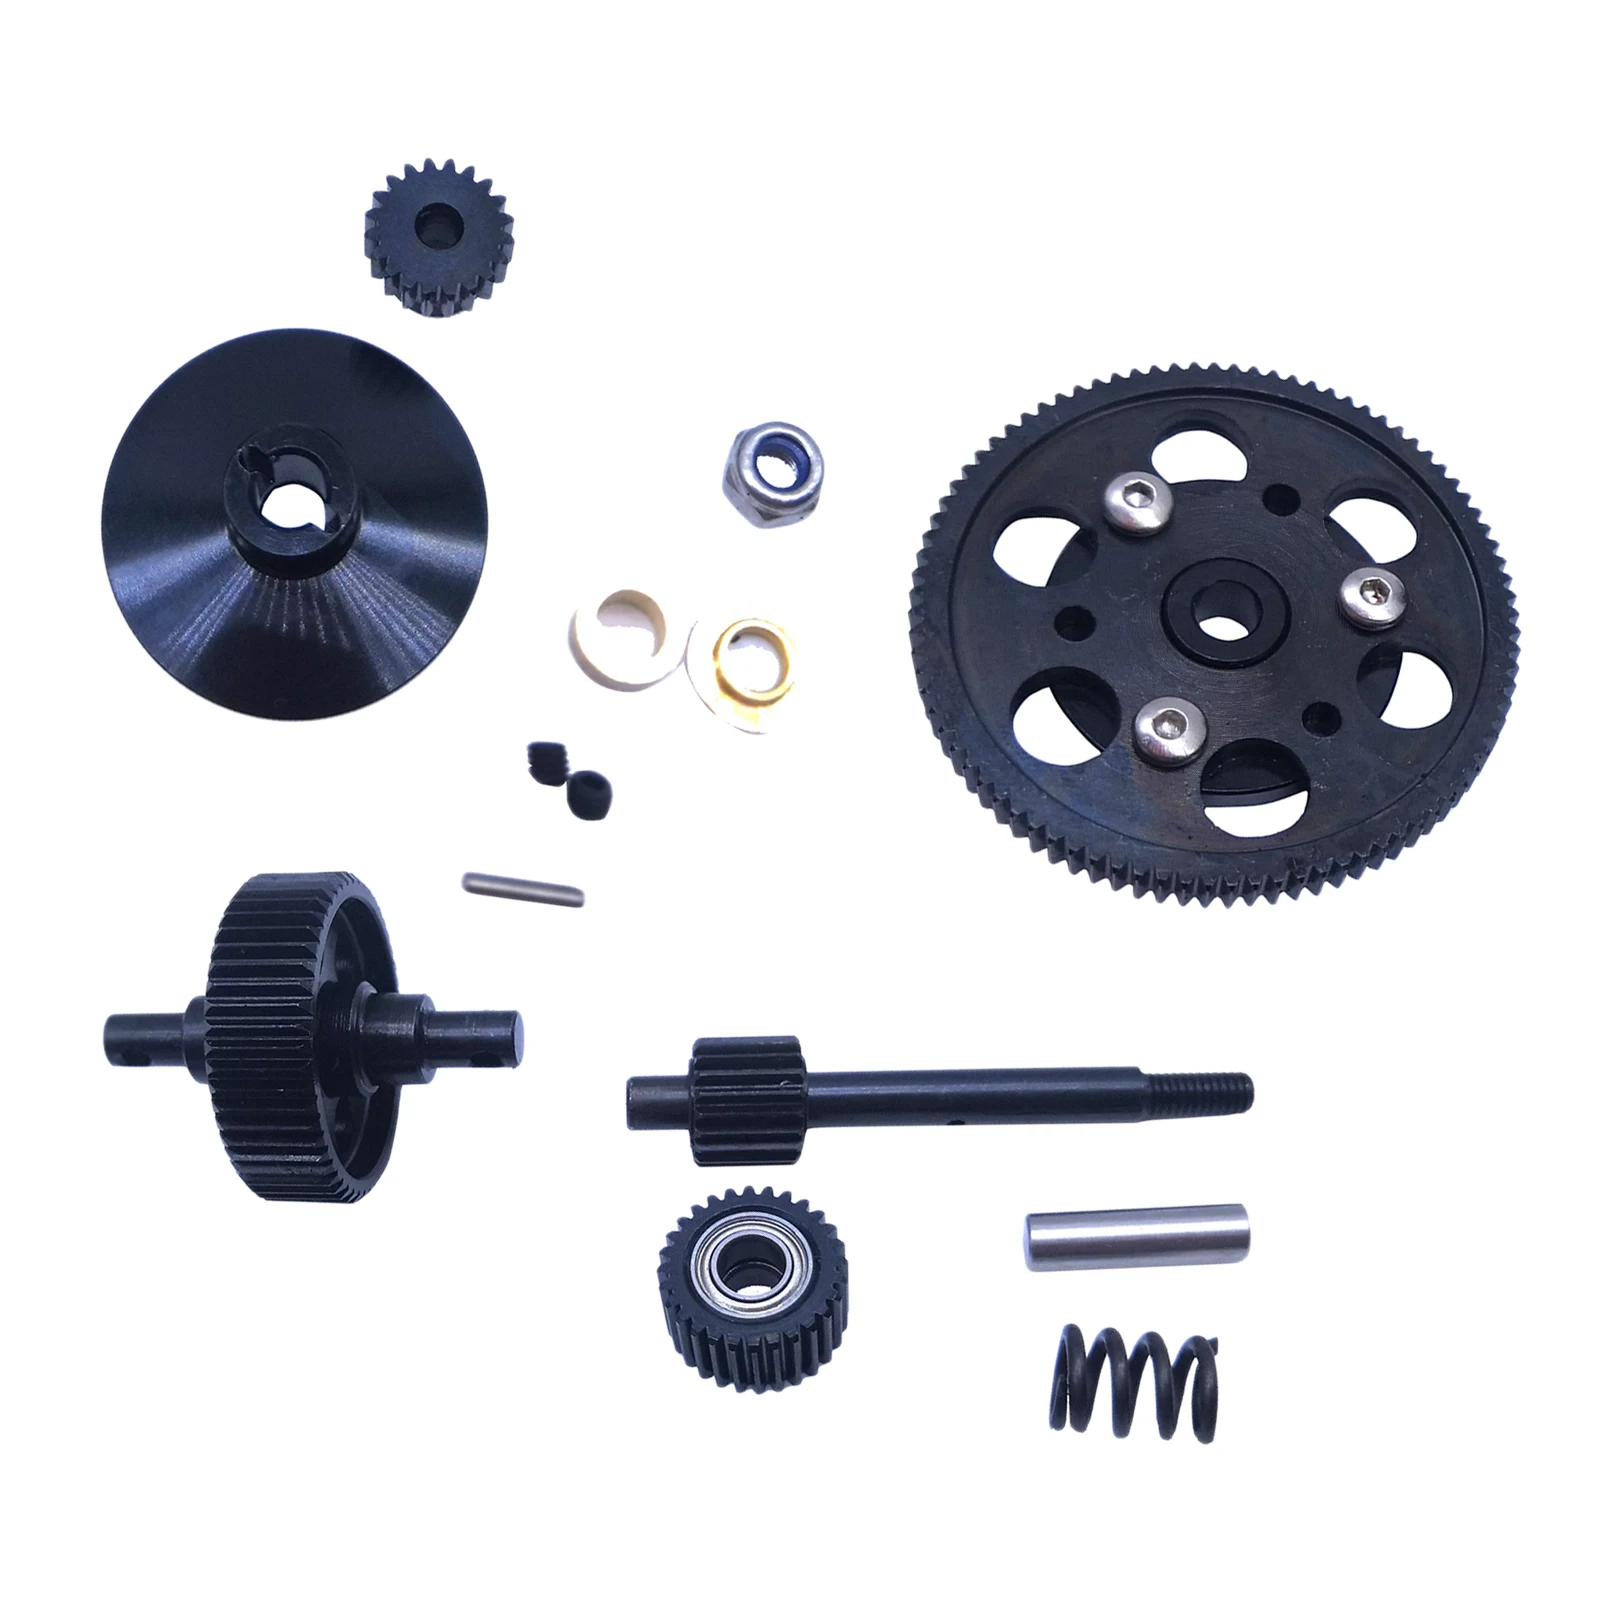 Complete Set Hardened Steel Transmission Gears With Motor Gear Big Gear 87T for Axial SCX10 1/10 RC Model Rock Crawler Car